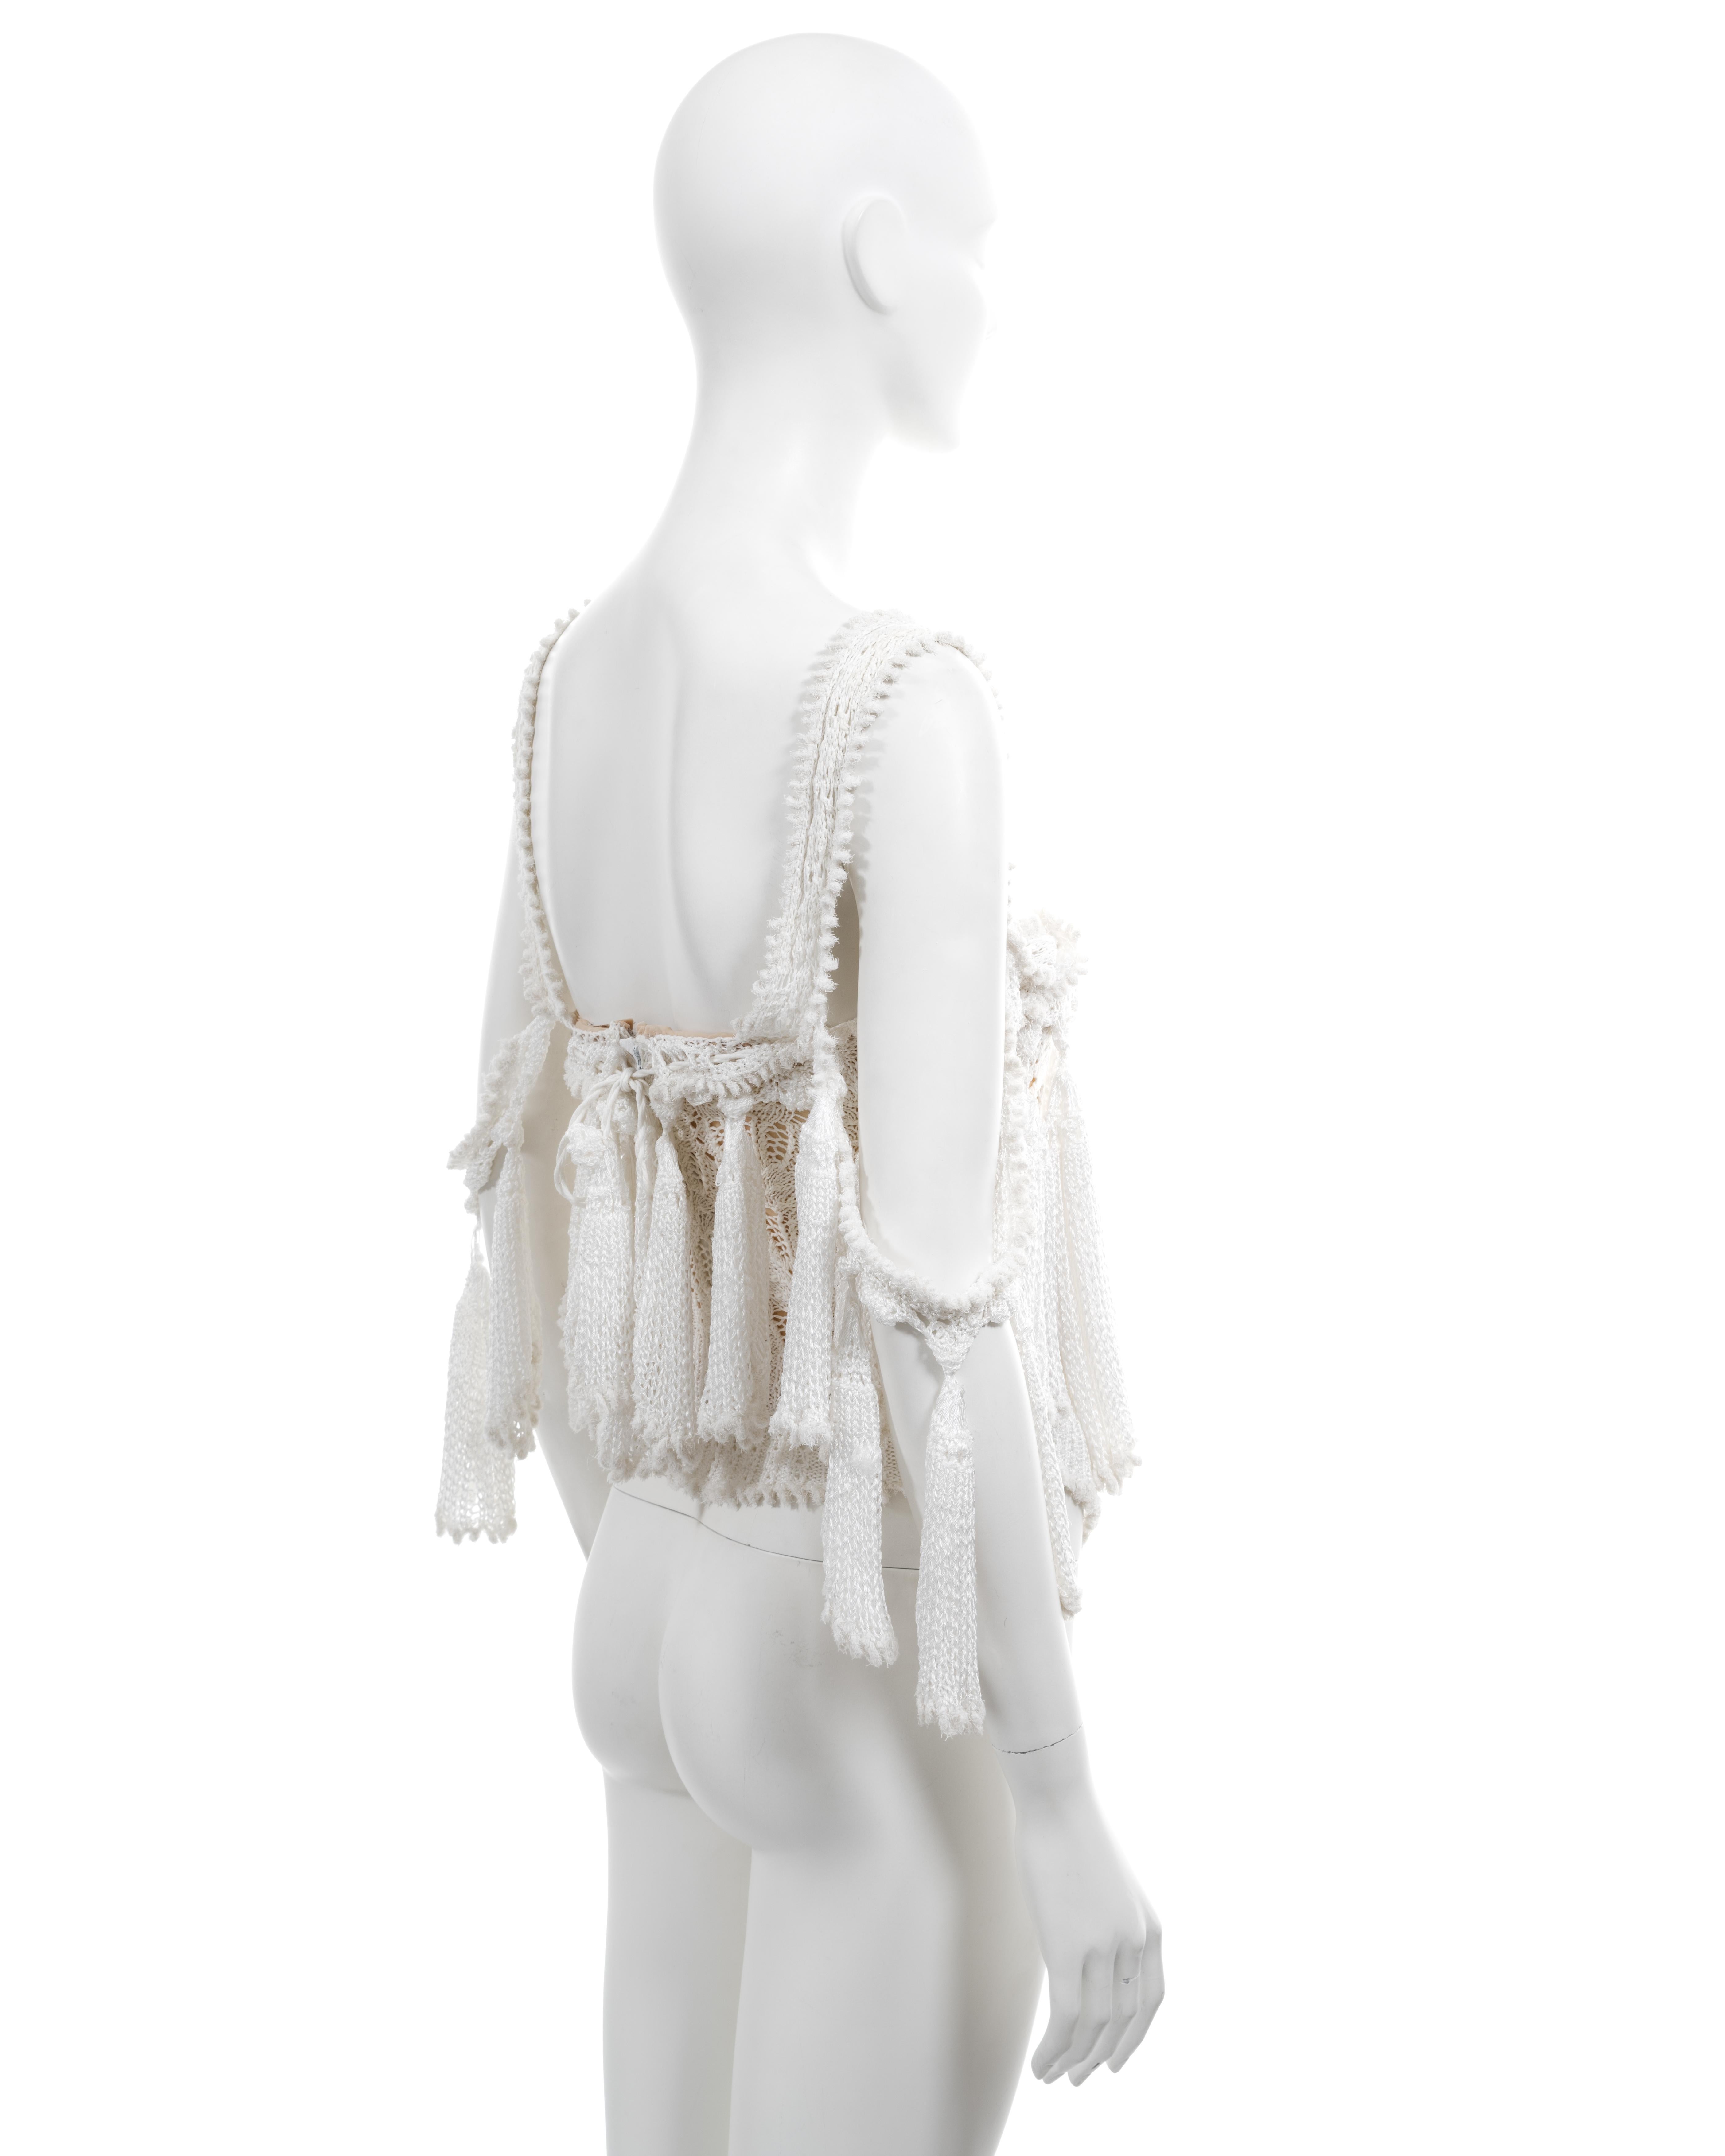 Vivienne Westwood 'Cafe Society' white knitted lace corset, ss 1994 For Sale 4